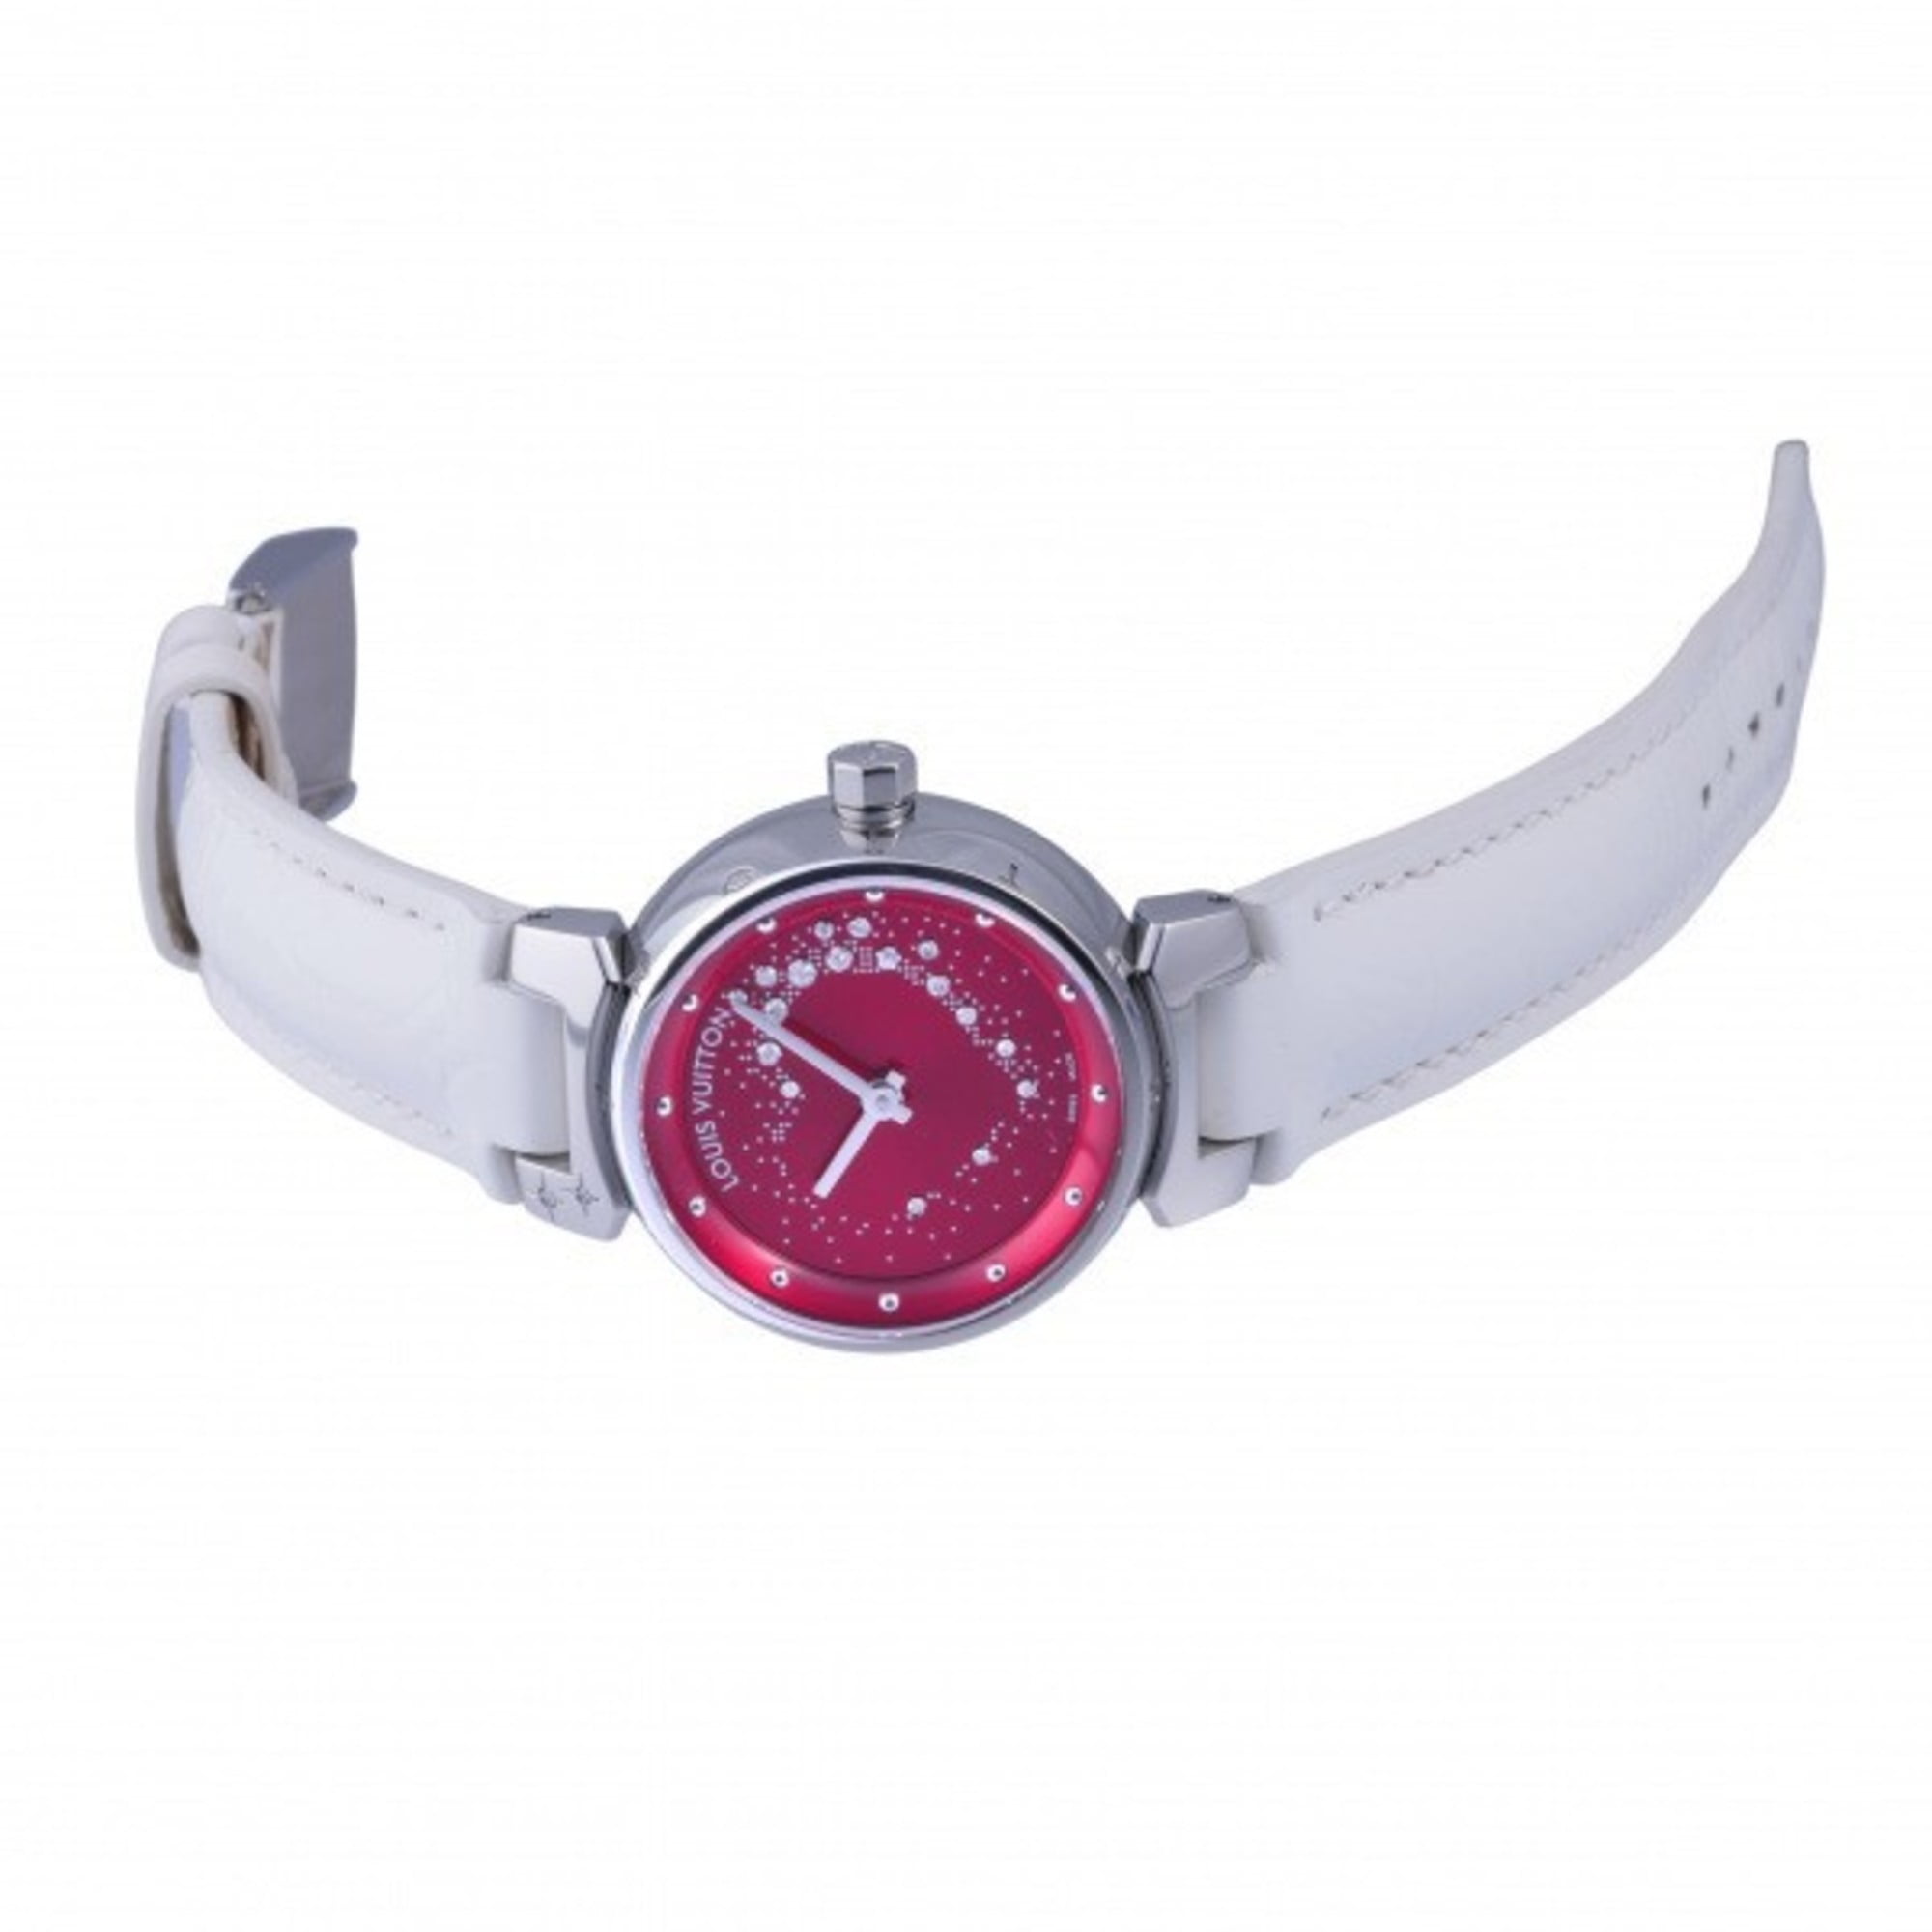 Louis Vuitton - Authenticated Tambour Watch - Pink for Women, Good Condition